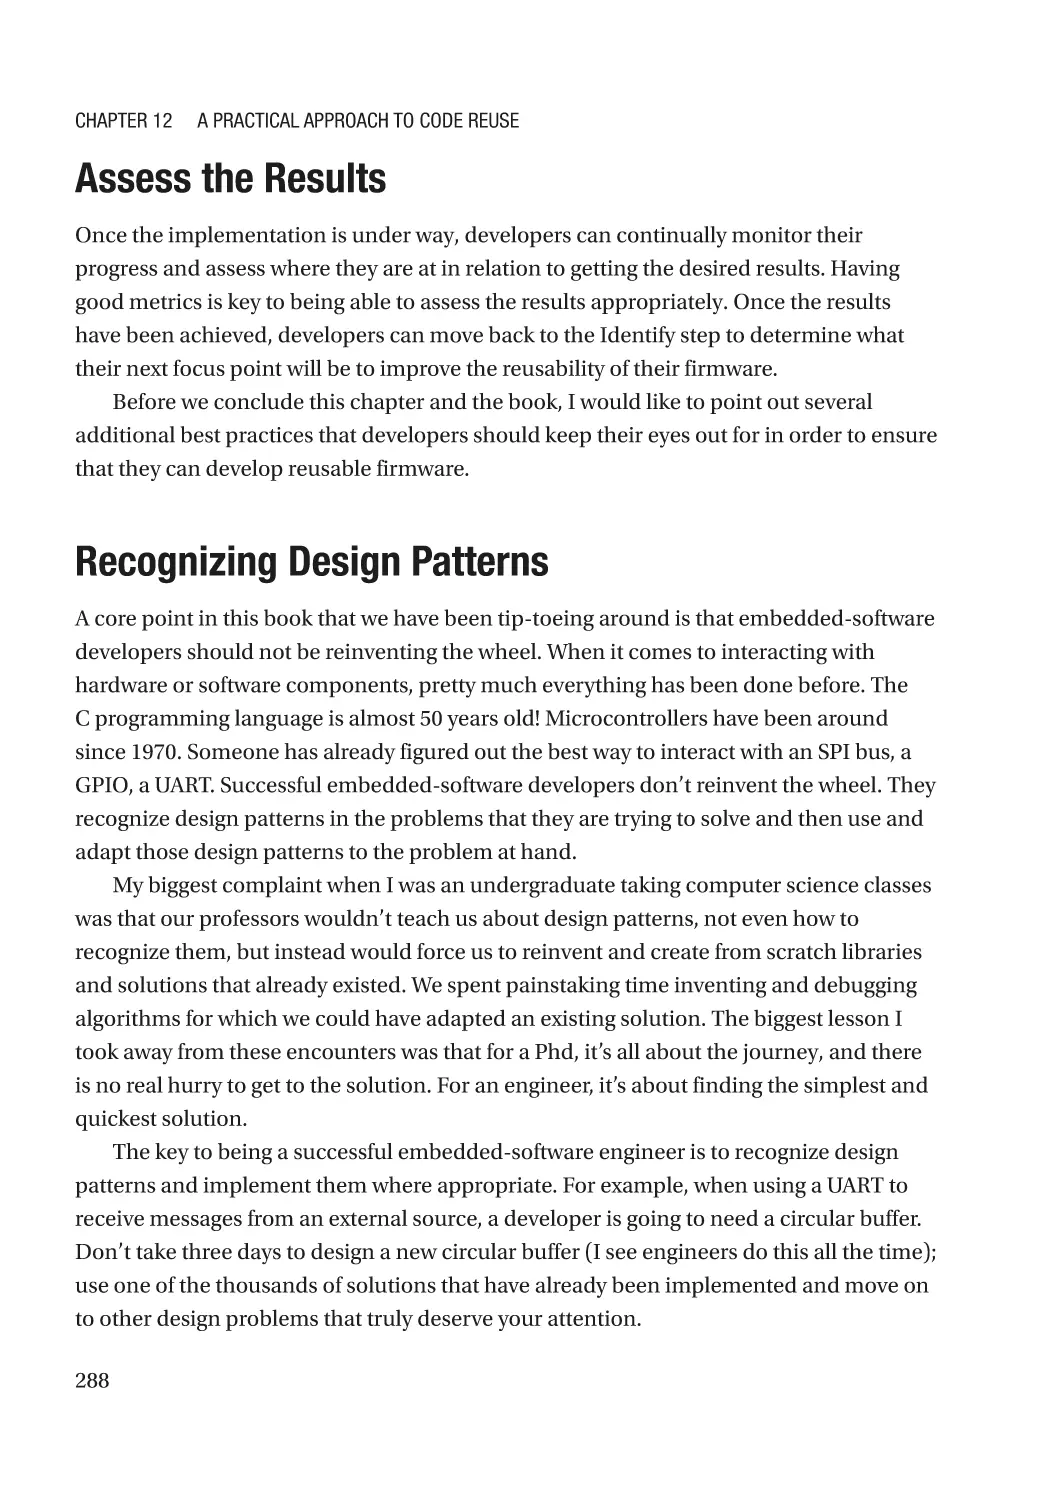 Assess the Results
Recognizing Design Patterns